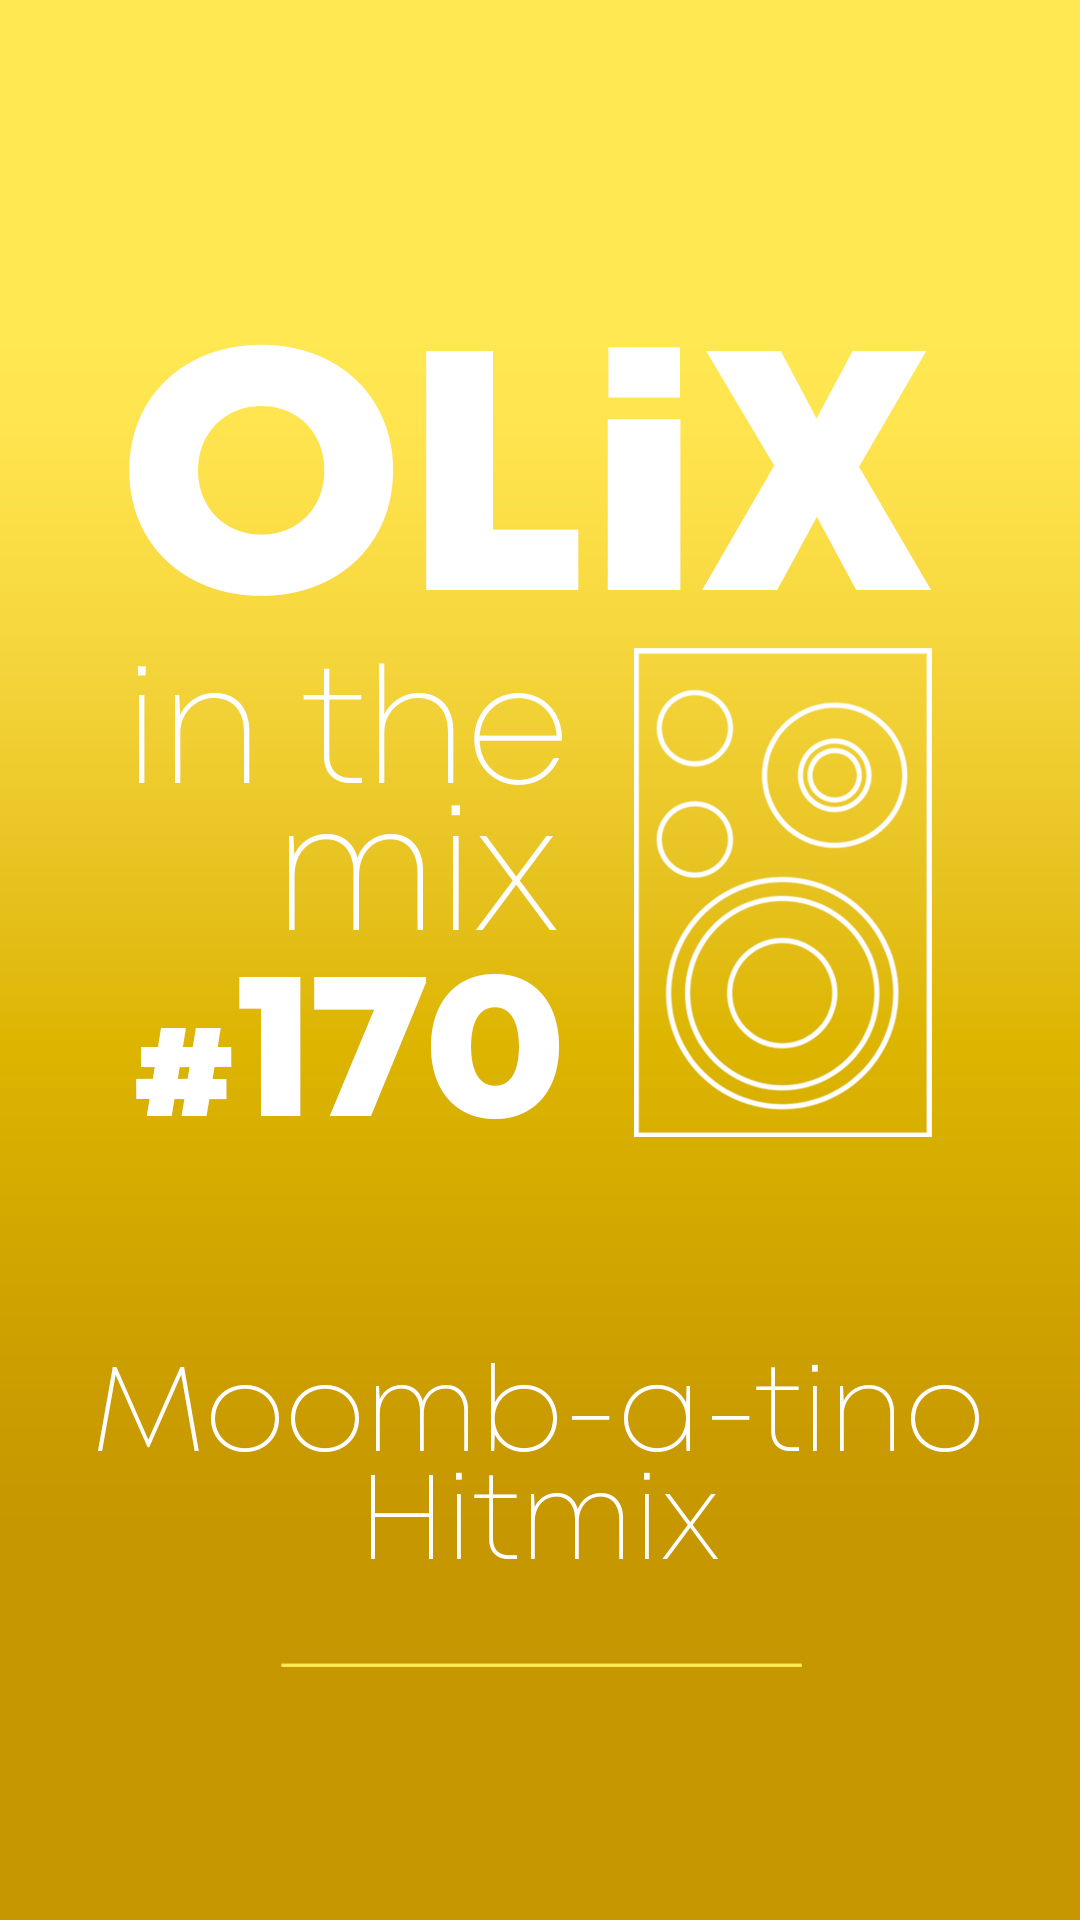 OLiX in the Mix - 170 - Moomb-a-Tino Hitmix